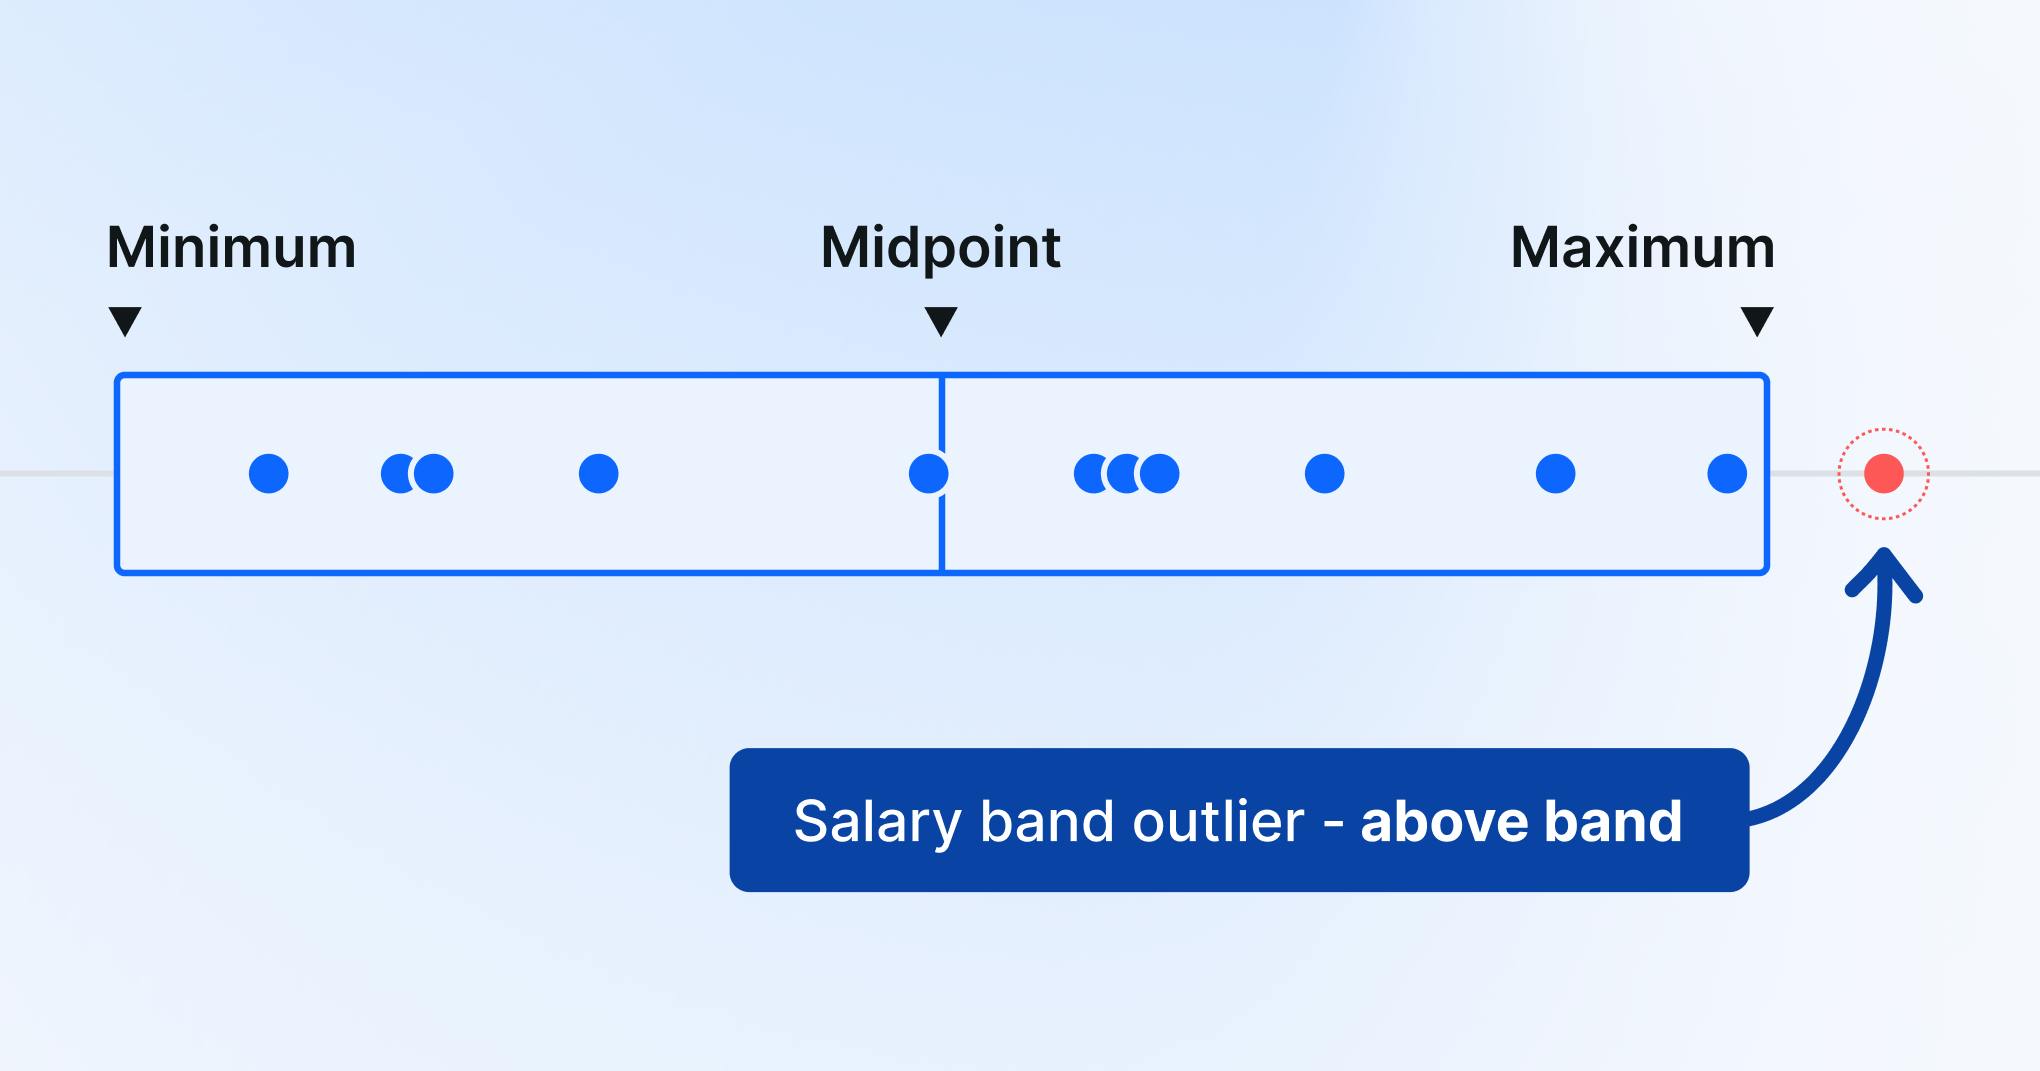 Salary band outlier shown above the band range